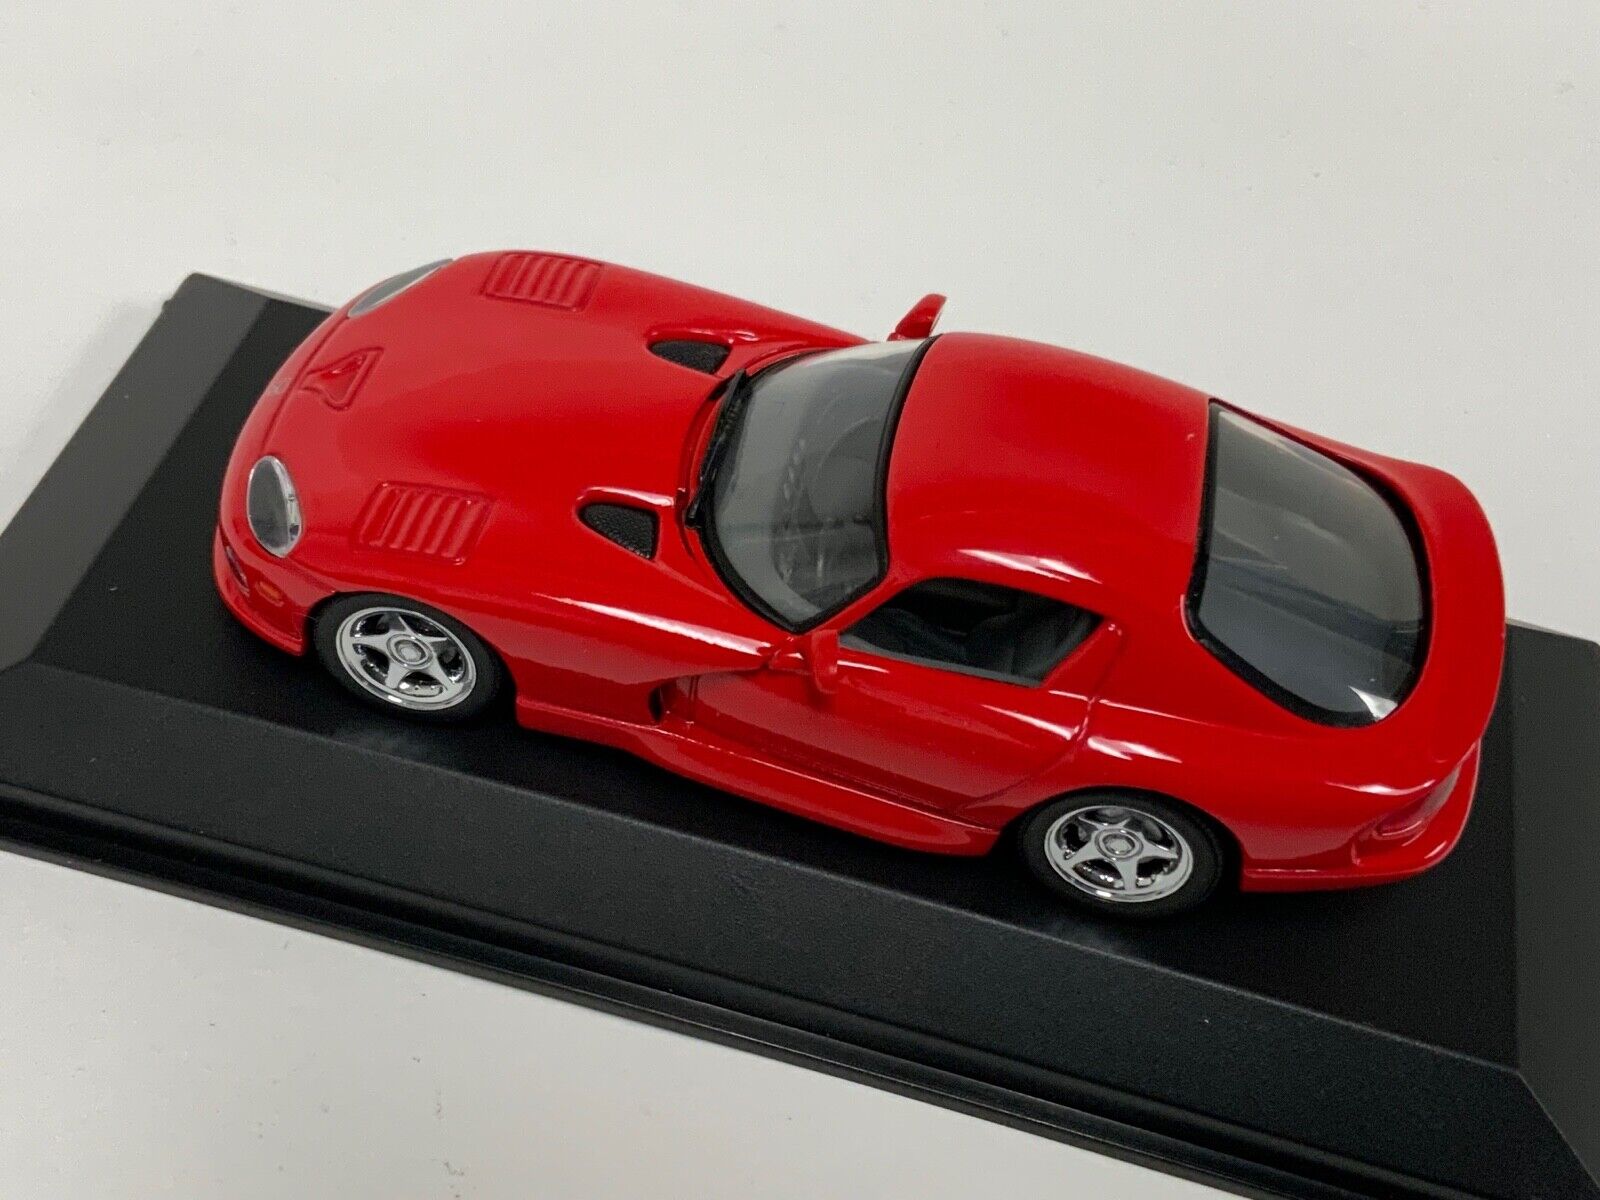 1/43 Minichamps Dodge Viper Coupe from 1993 in Red 430 144022 CS366